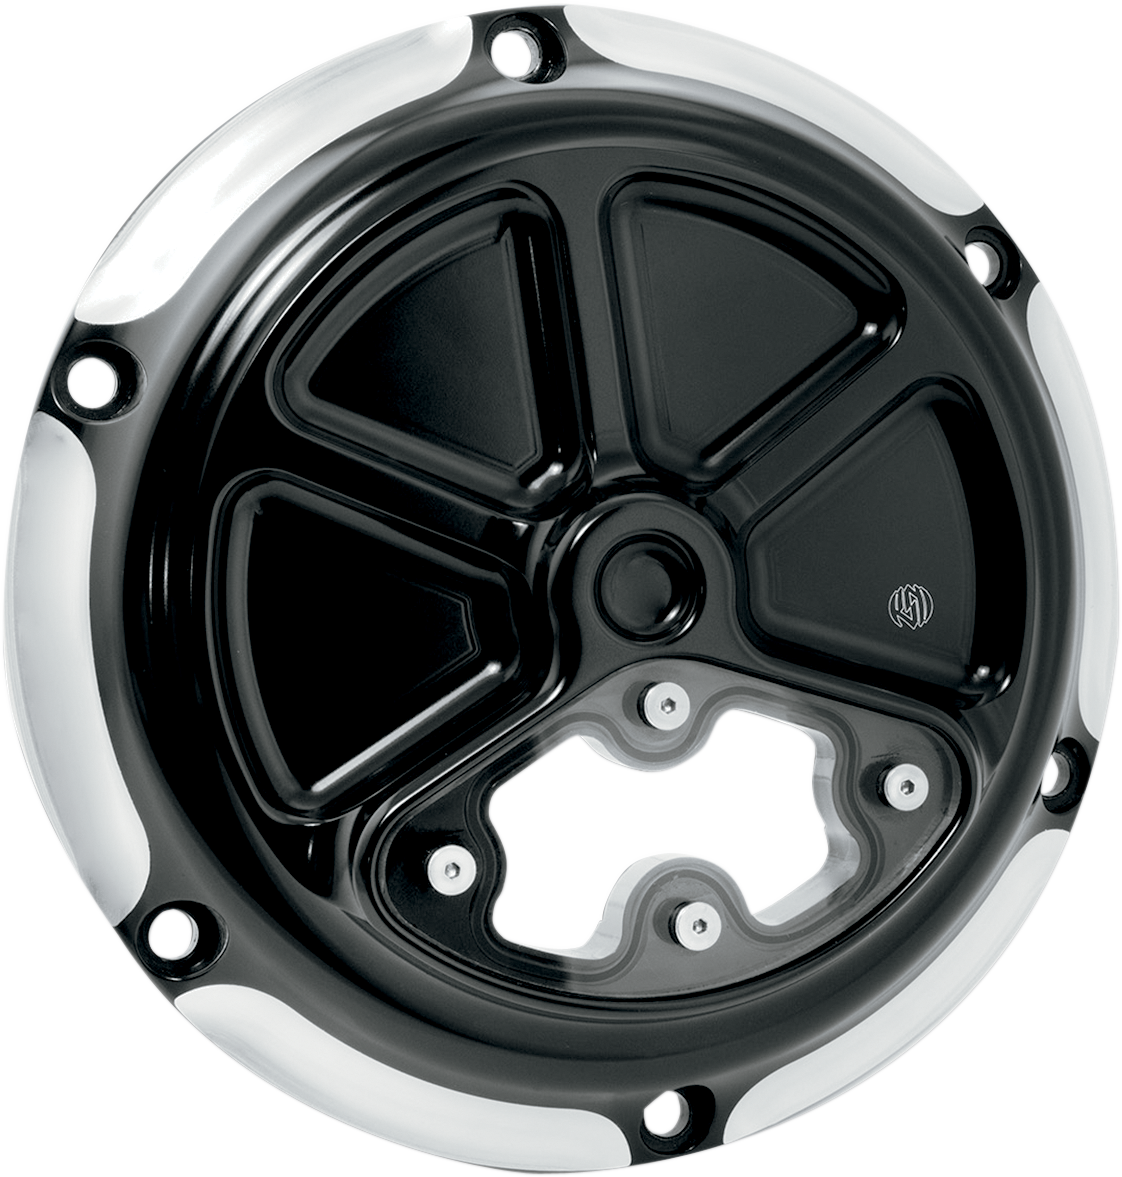 RSD Clarity 6-Hole Derby Cover 2004-2019 Harley Davidson Sportster Models XL